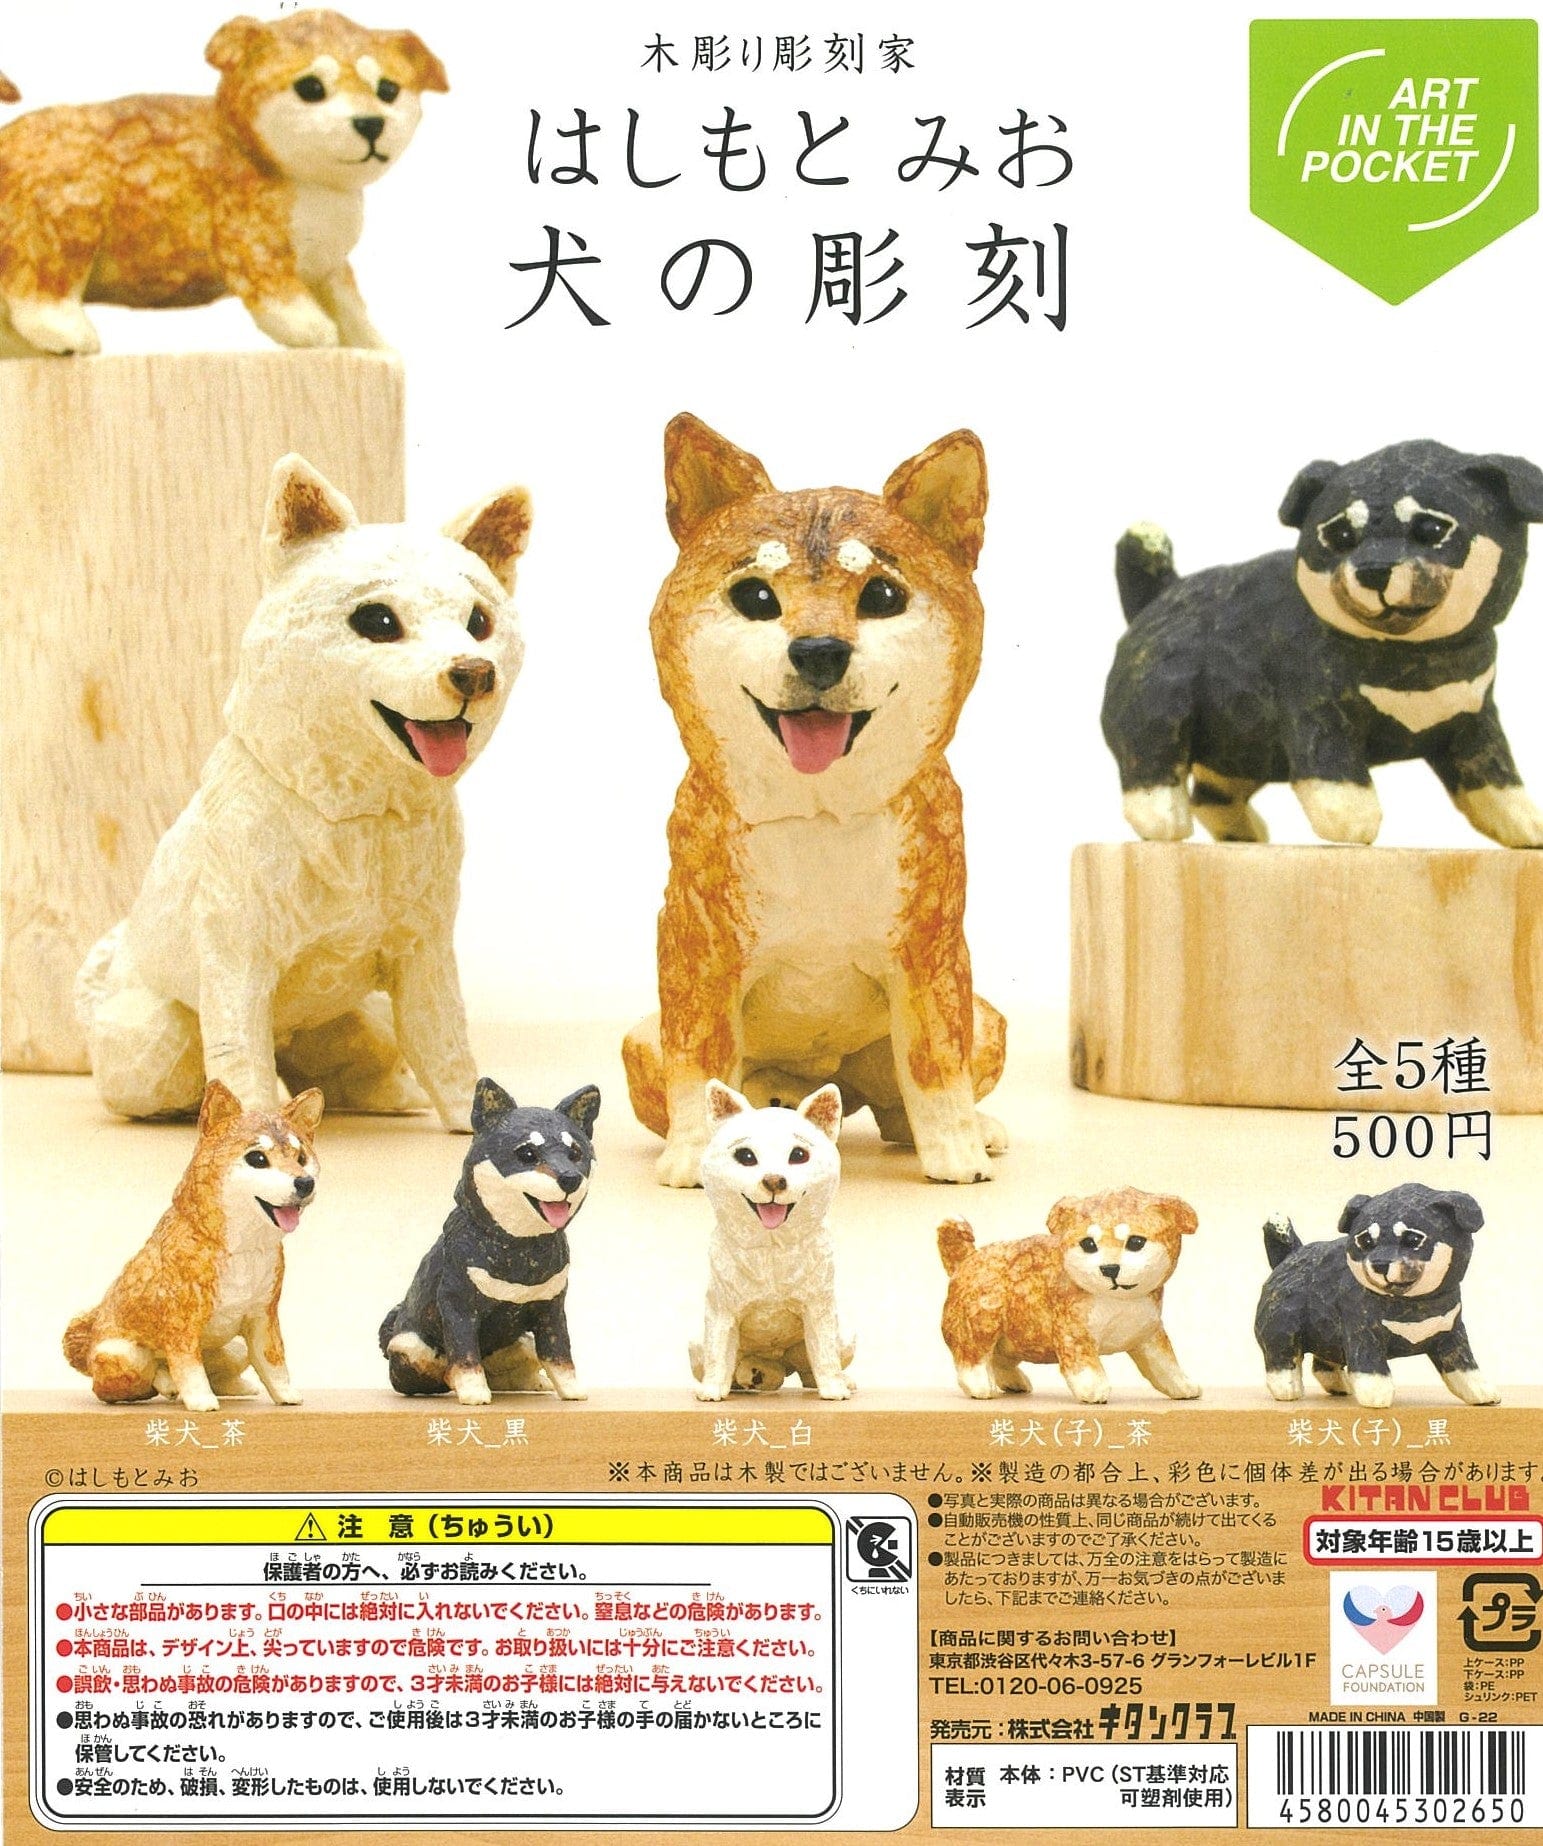 Art In The Pocket CP1817 Art In The Pocket Series Mio Hashimoto Dog's Carving